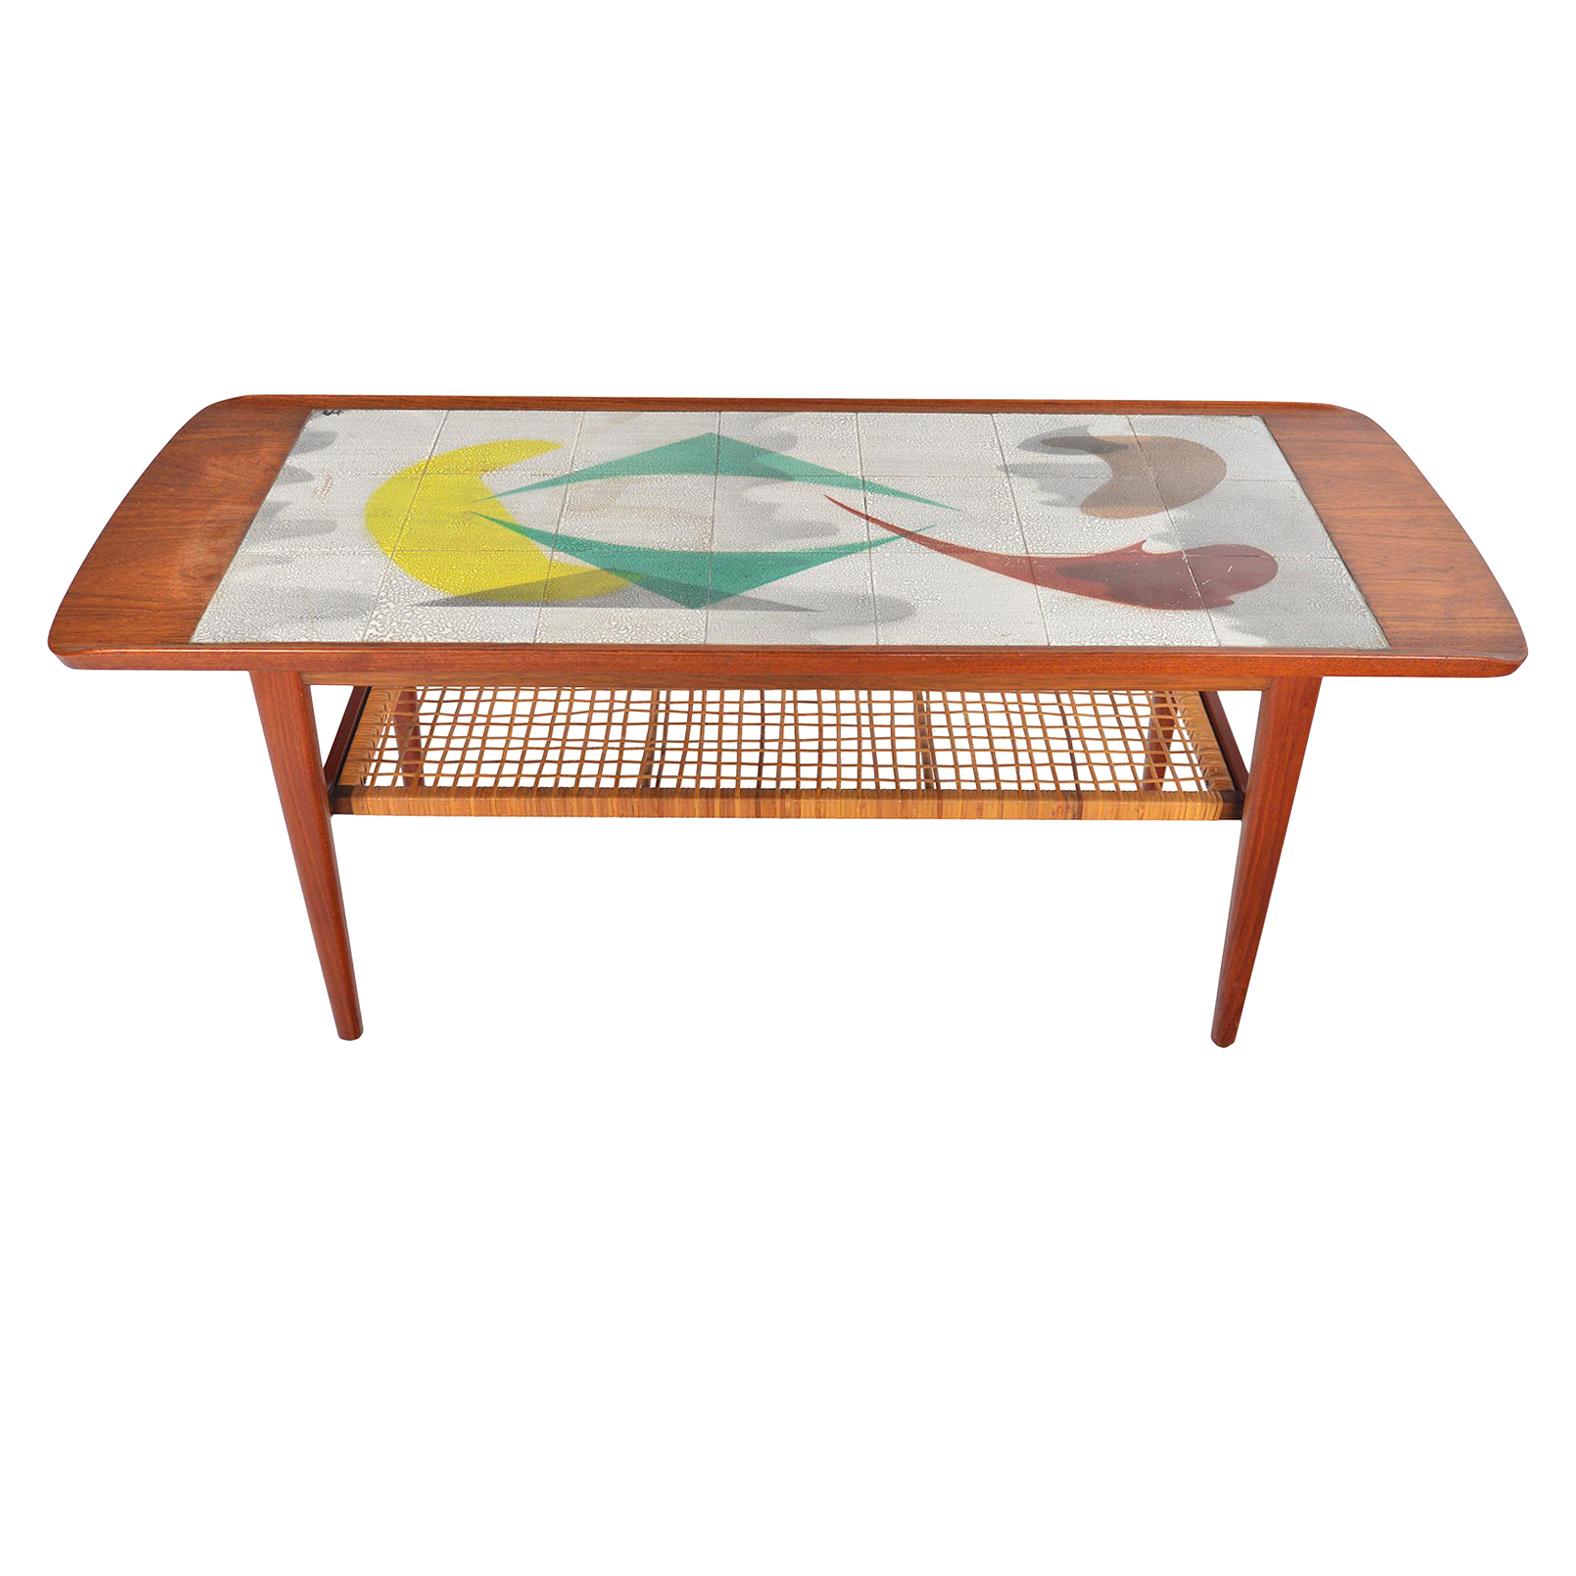 Danish Modern Teak and Tile Midcentury Coffee Table with Cane Rack